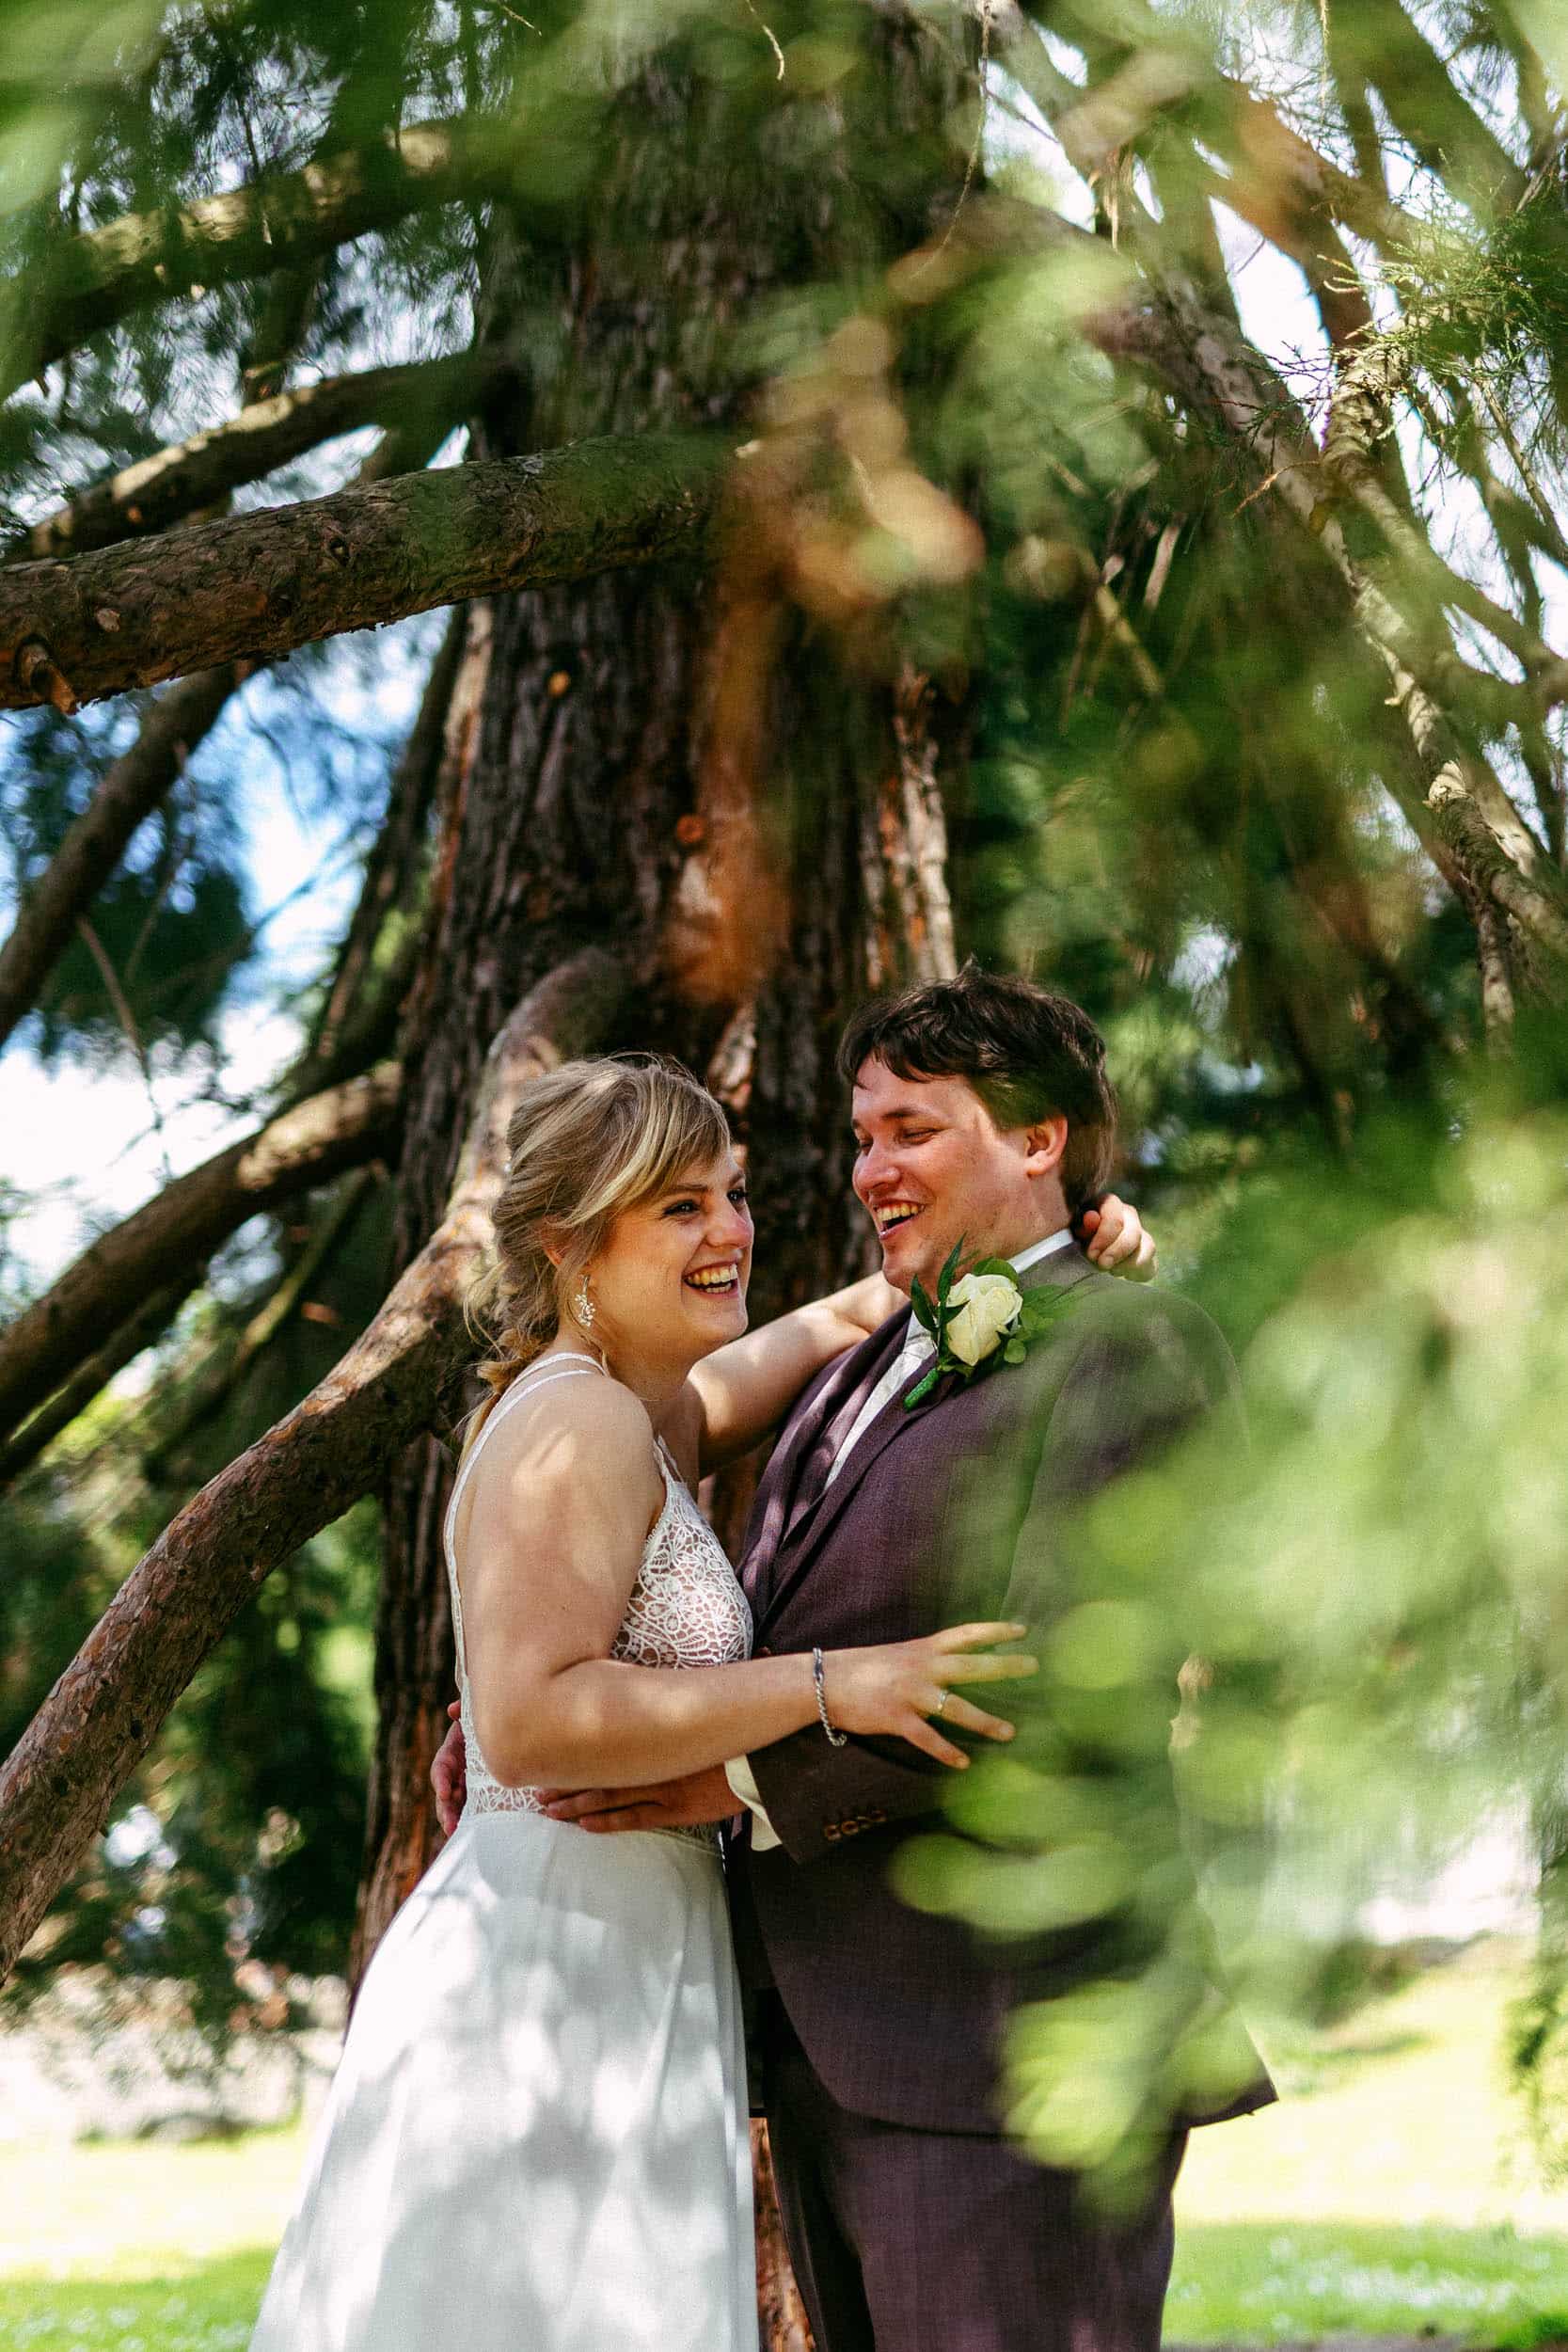 A bride and groom cuddling in front of a tree during their perfect wedding day.